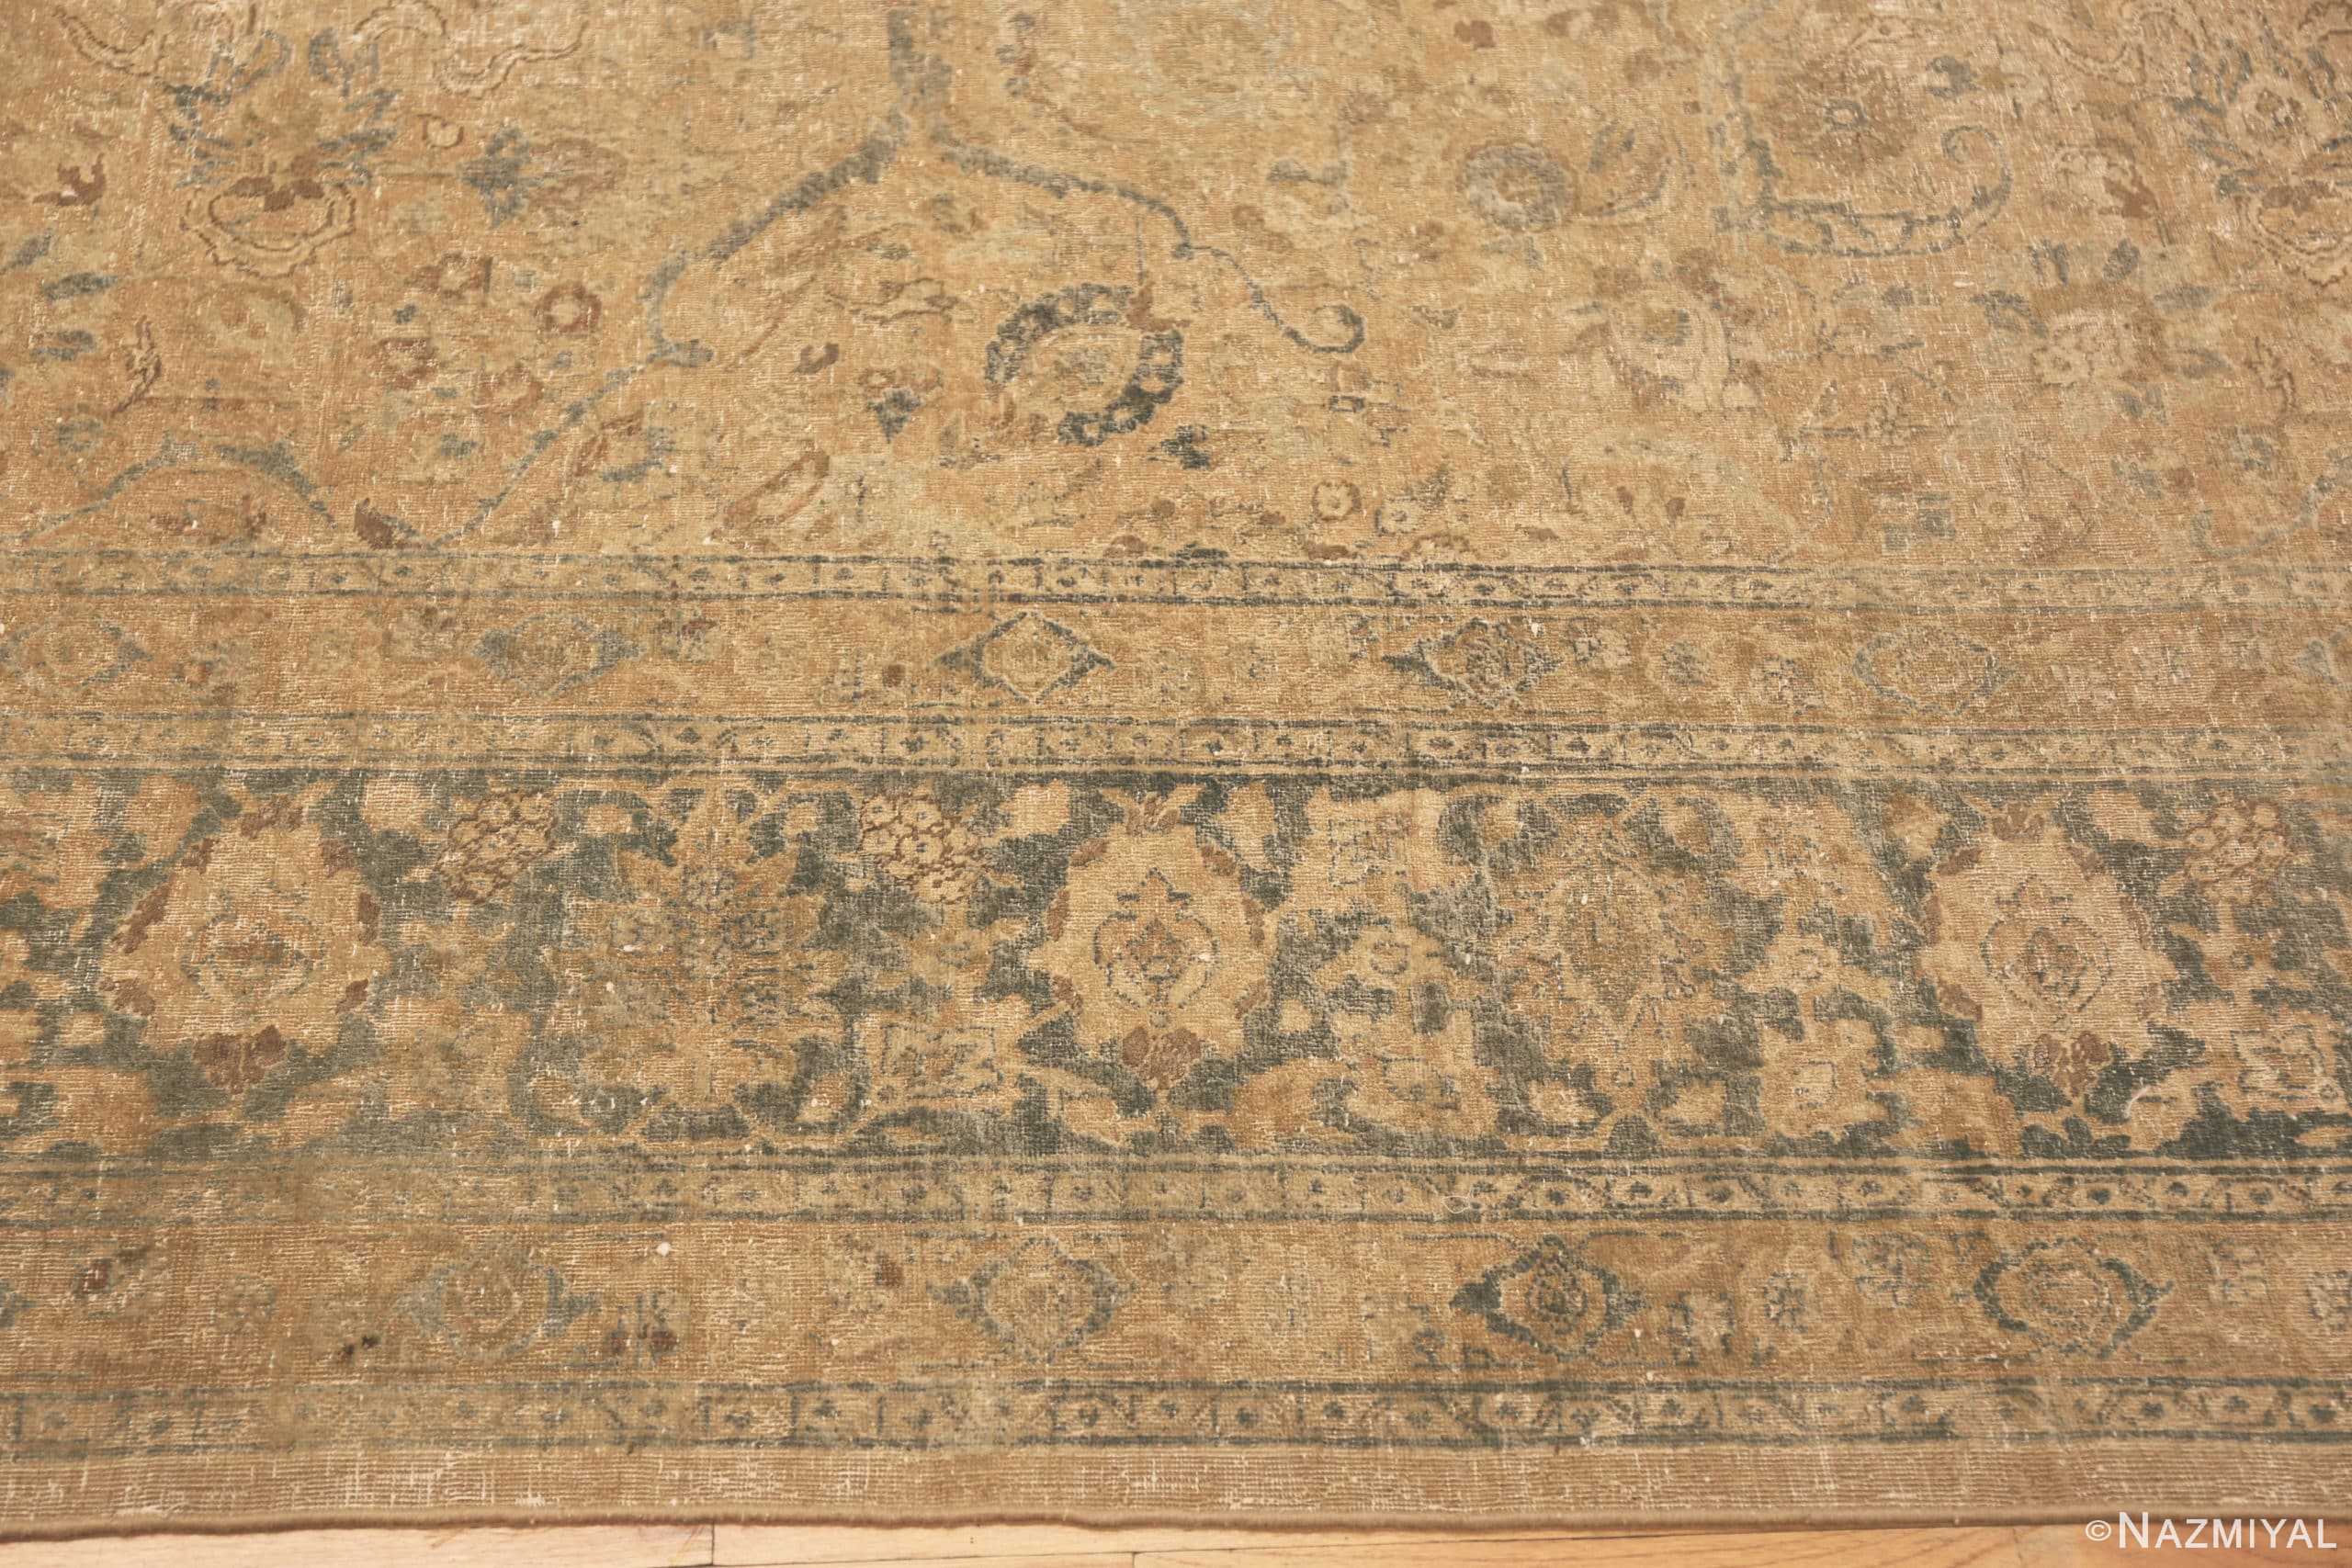 Border Of Antique Persian Floral Tabriz Rug 70956 by Nazmiyal Antique Rugs